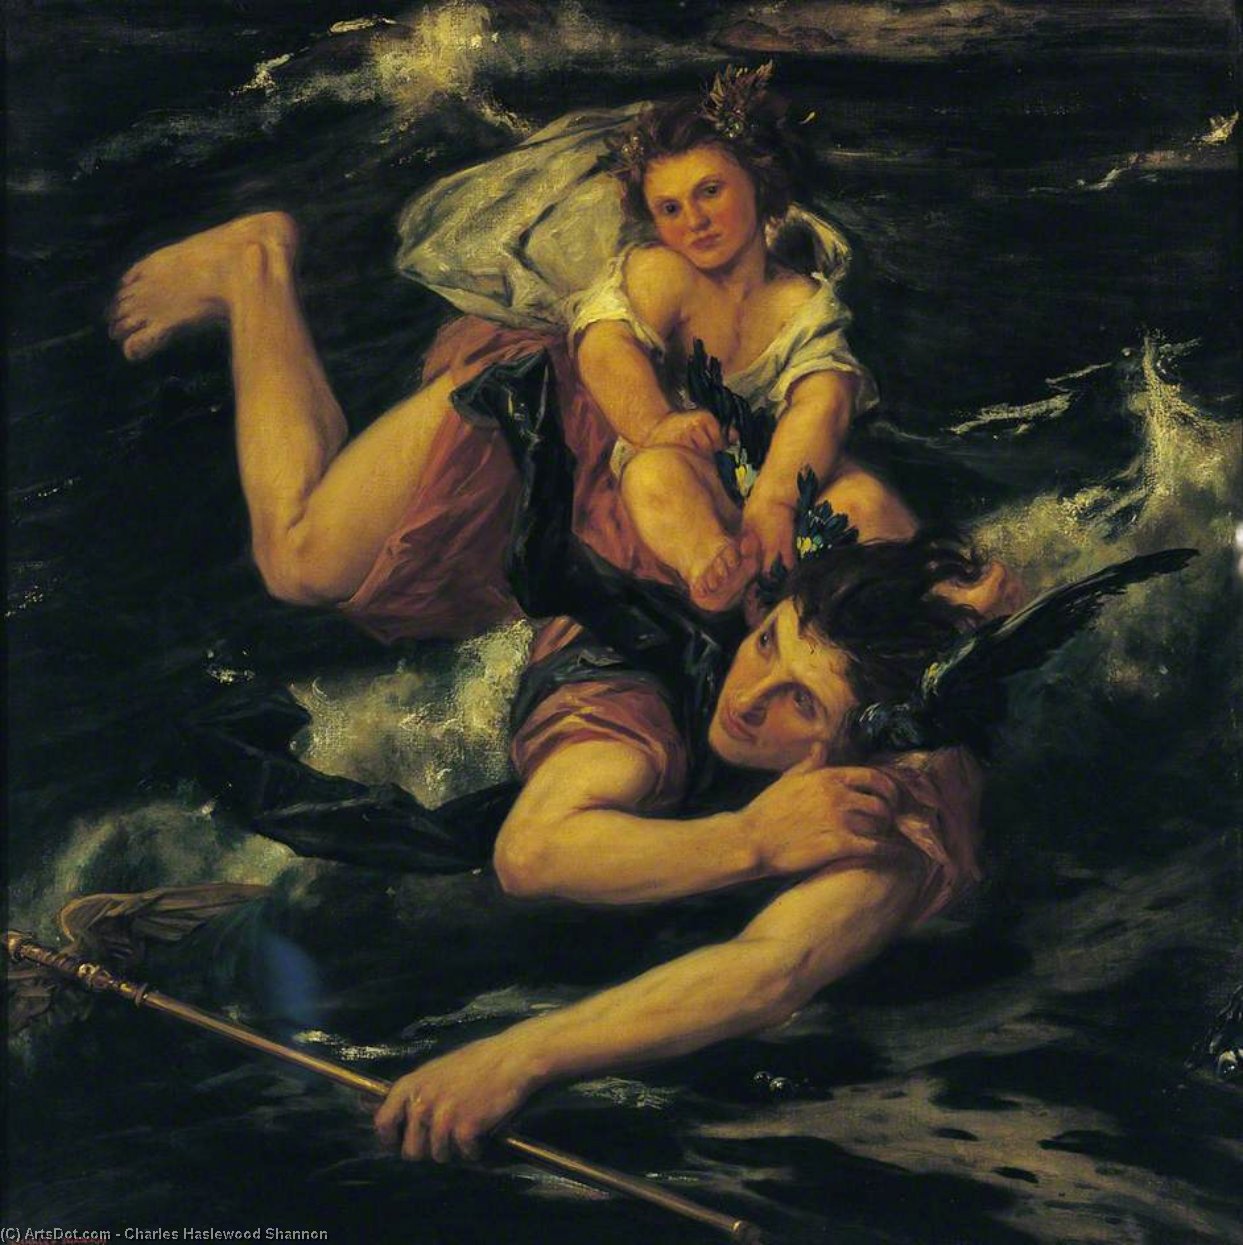 Buy Museum Art Reproductions Hermes And The Infant Bacchus by Charles Hazelwood Shannon | ArtsDot.com